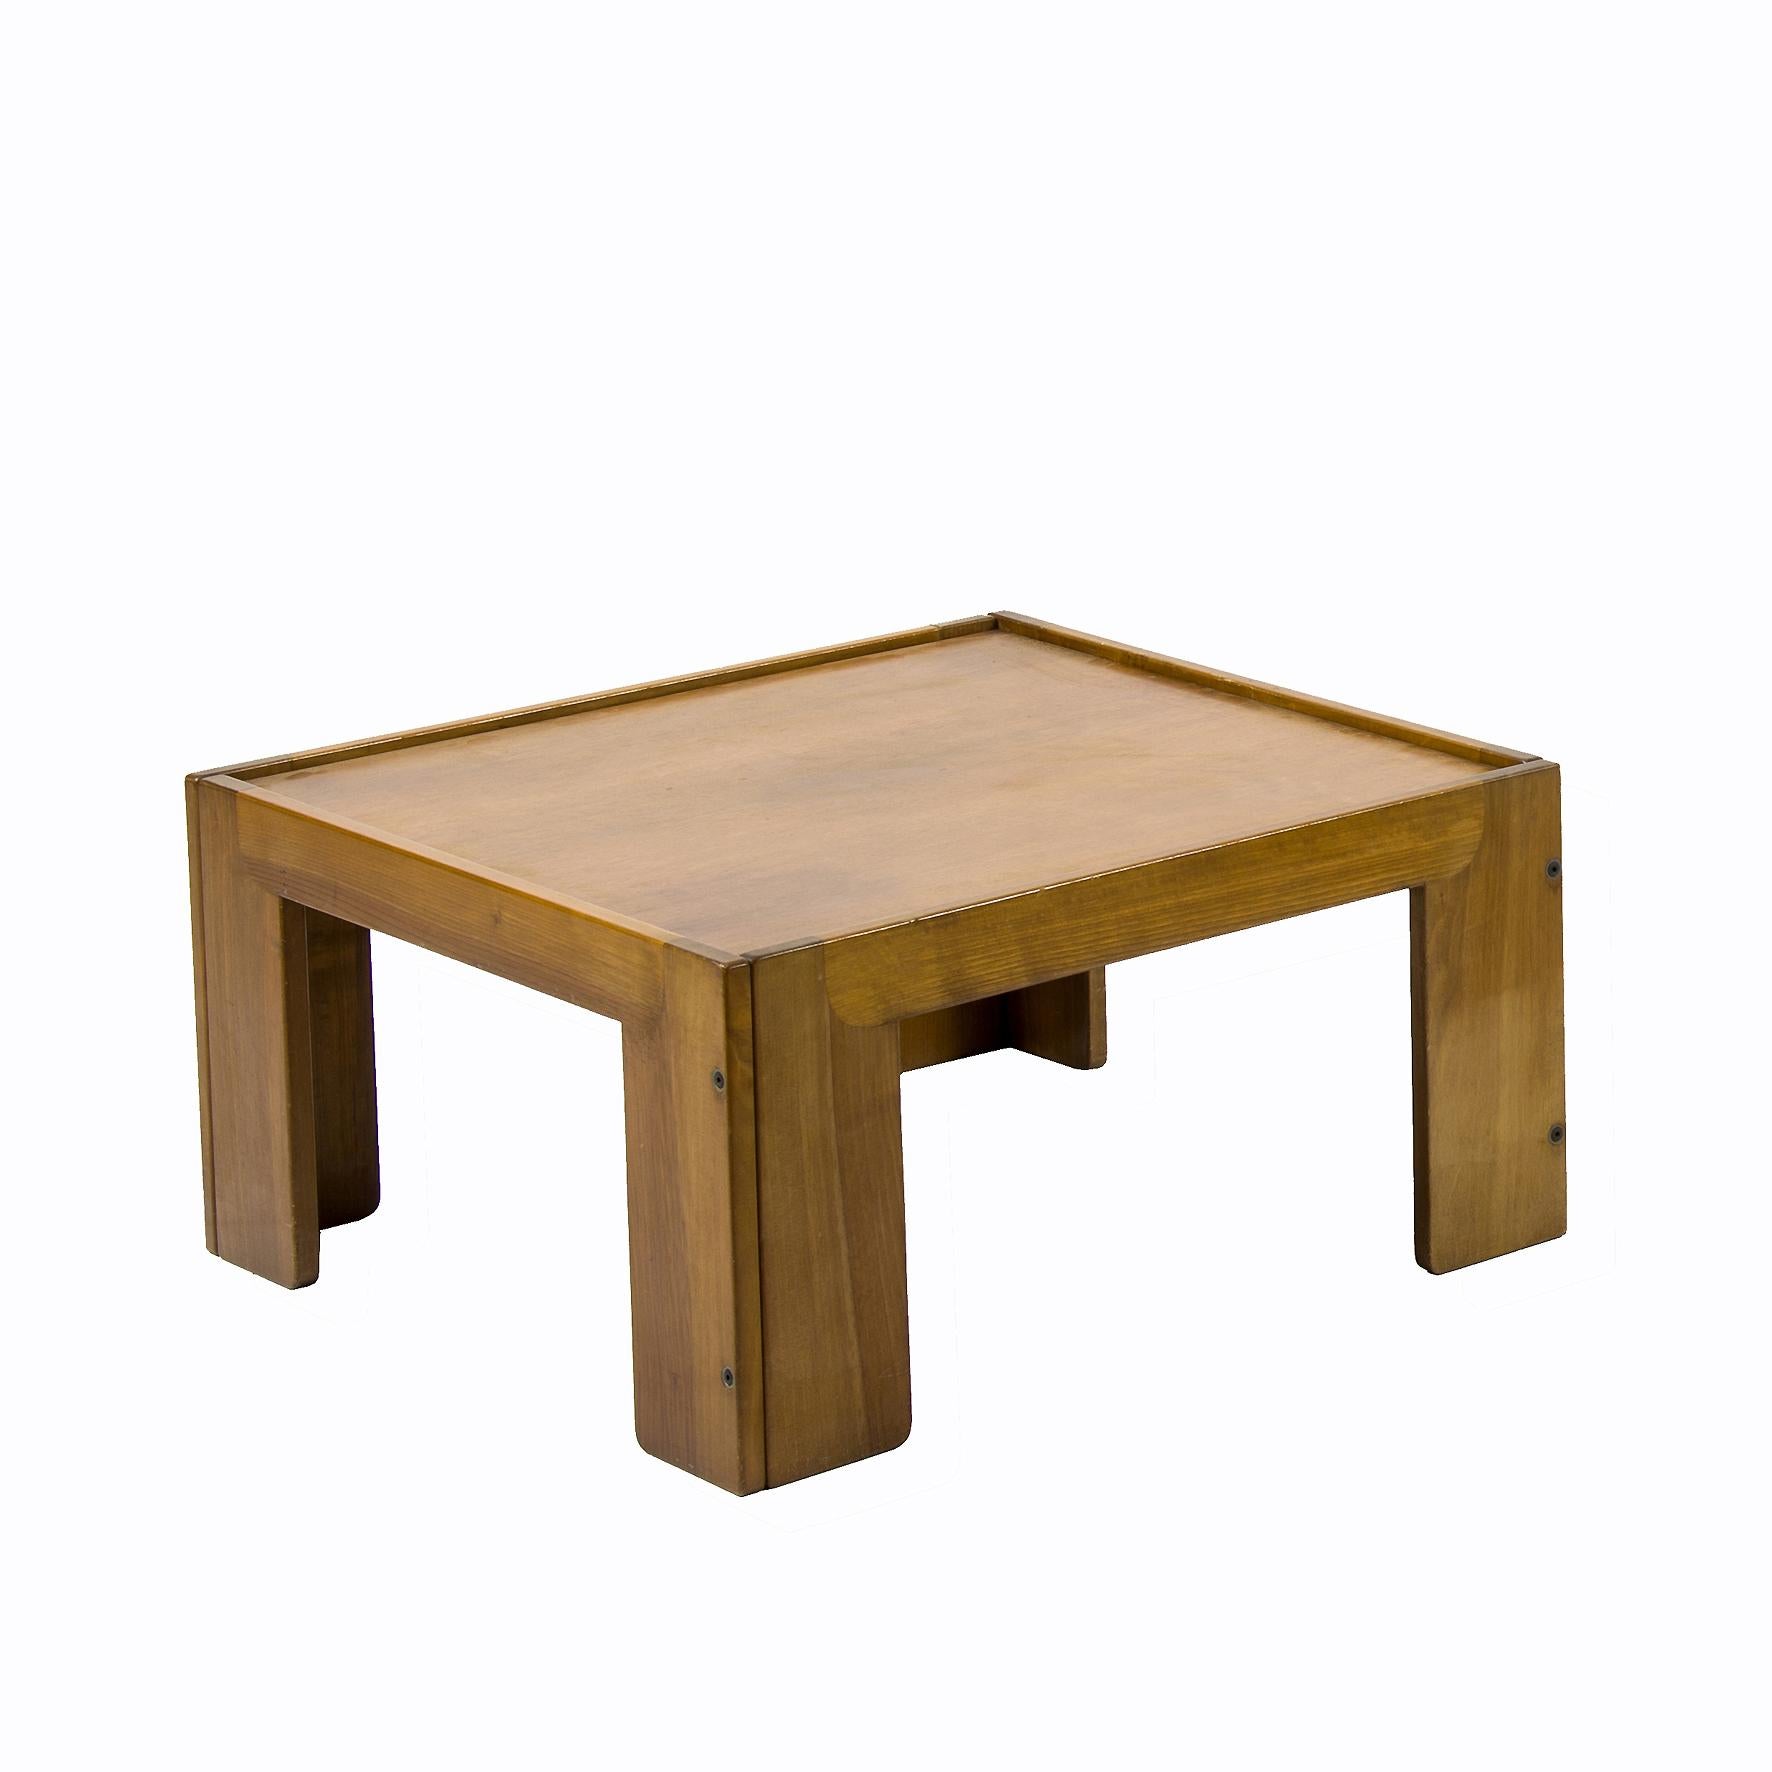 A pair of square walnut low tables, the top plate rested on the frame supported by four rectangular feet.
Manufactured by Cassina.
Italy,
1960s.

Provenance
Private collection

Literature
Domus 453, agosto 1967, p.54

Domus 455, ottobre